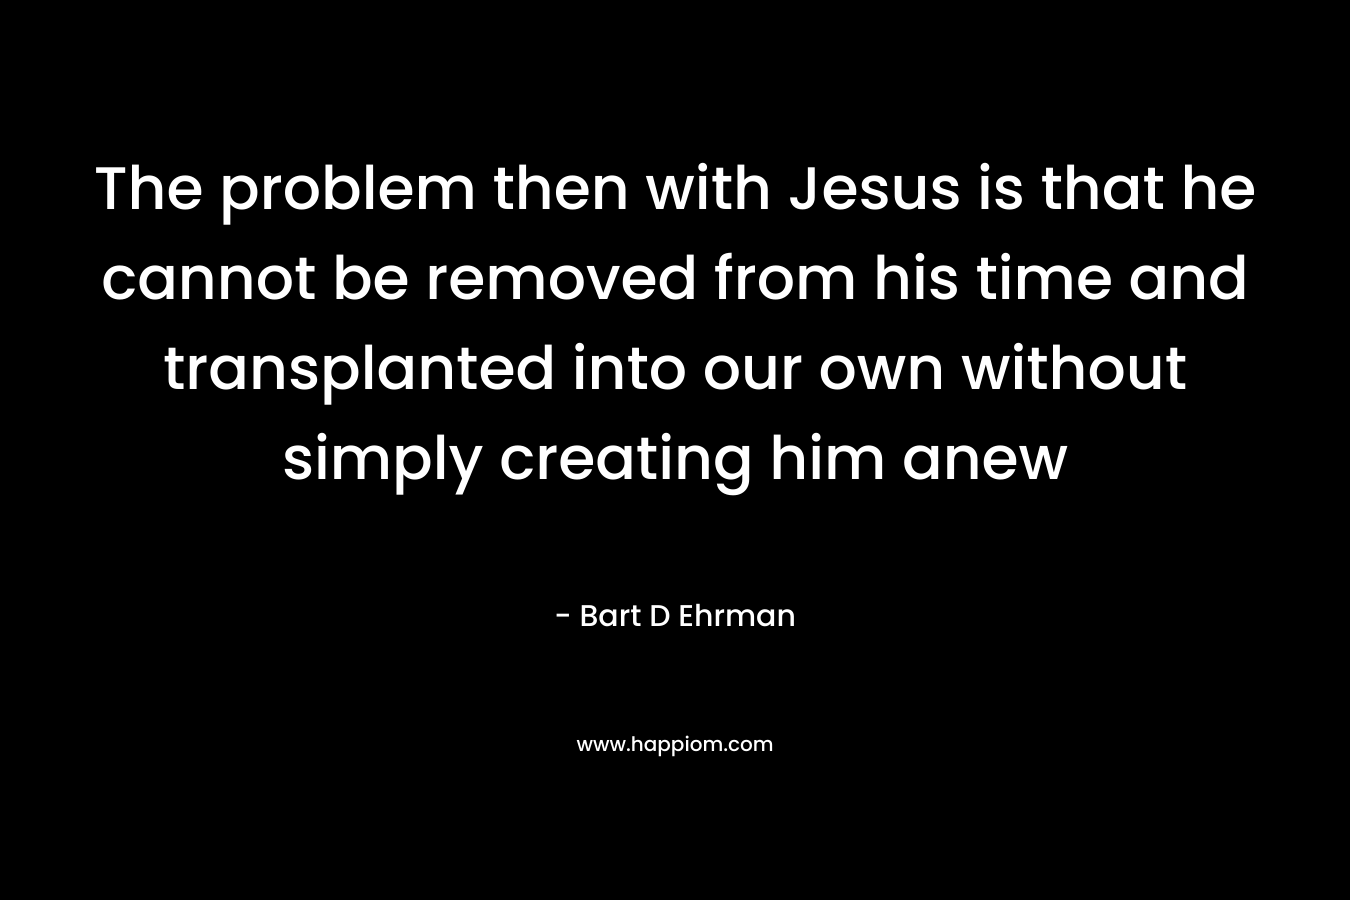 The problem then with Jesus is that he cannot be removed from his time and transplanted into our own without simply creating him anew